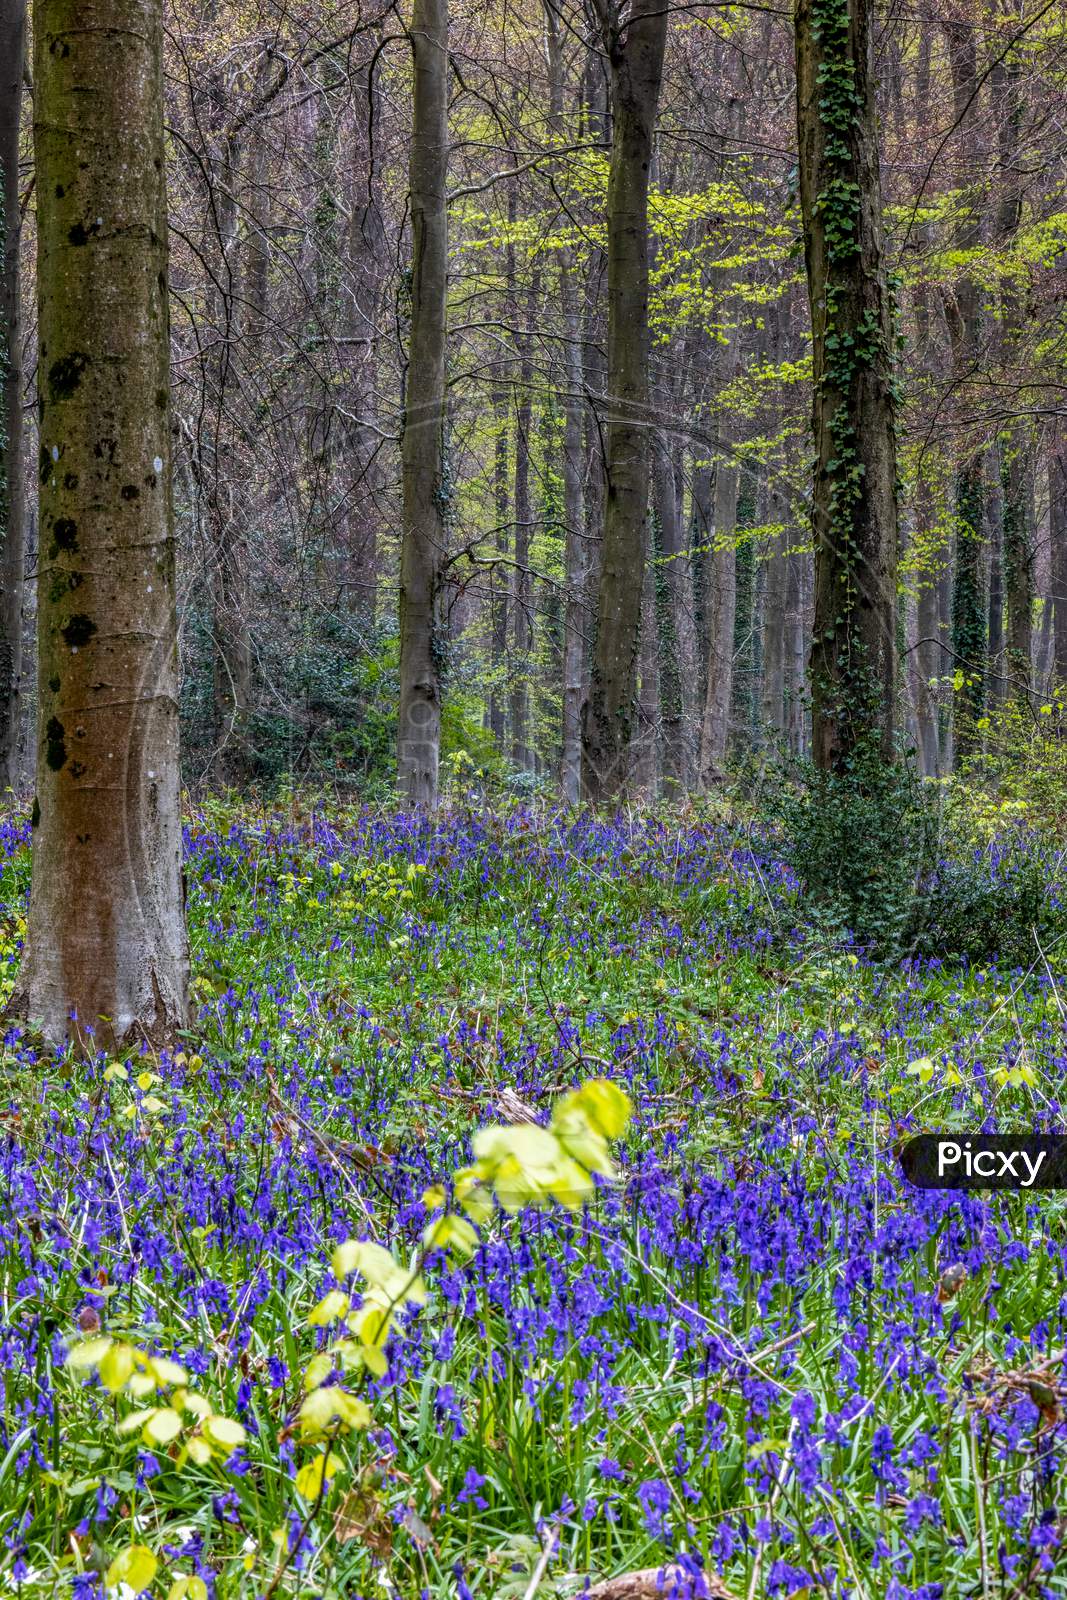 View Of The Bluebells Emerging In Wepham Wood